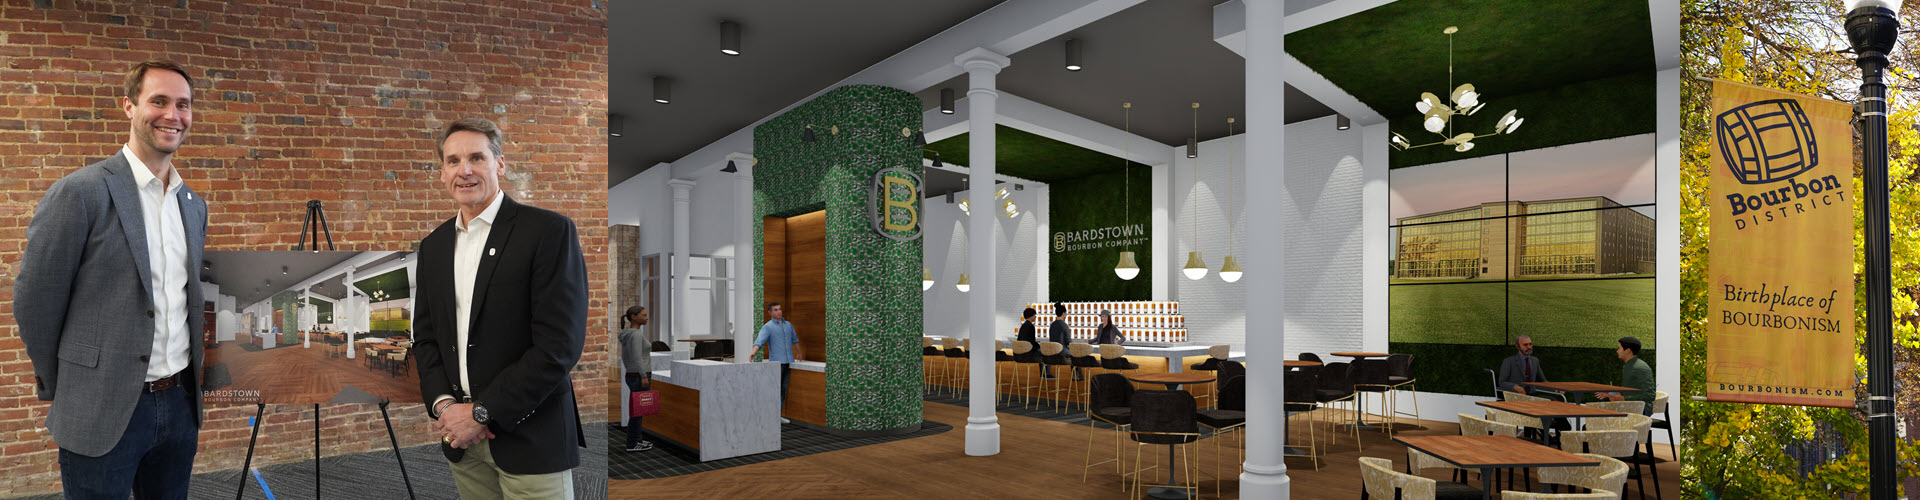 Bardstown Bourbon Company - BBC to Open Satellite Tasting Room on Whiskey Row in Louisville